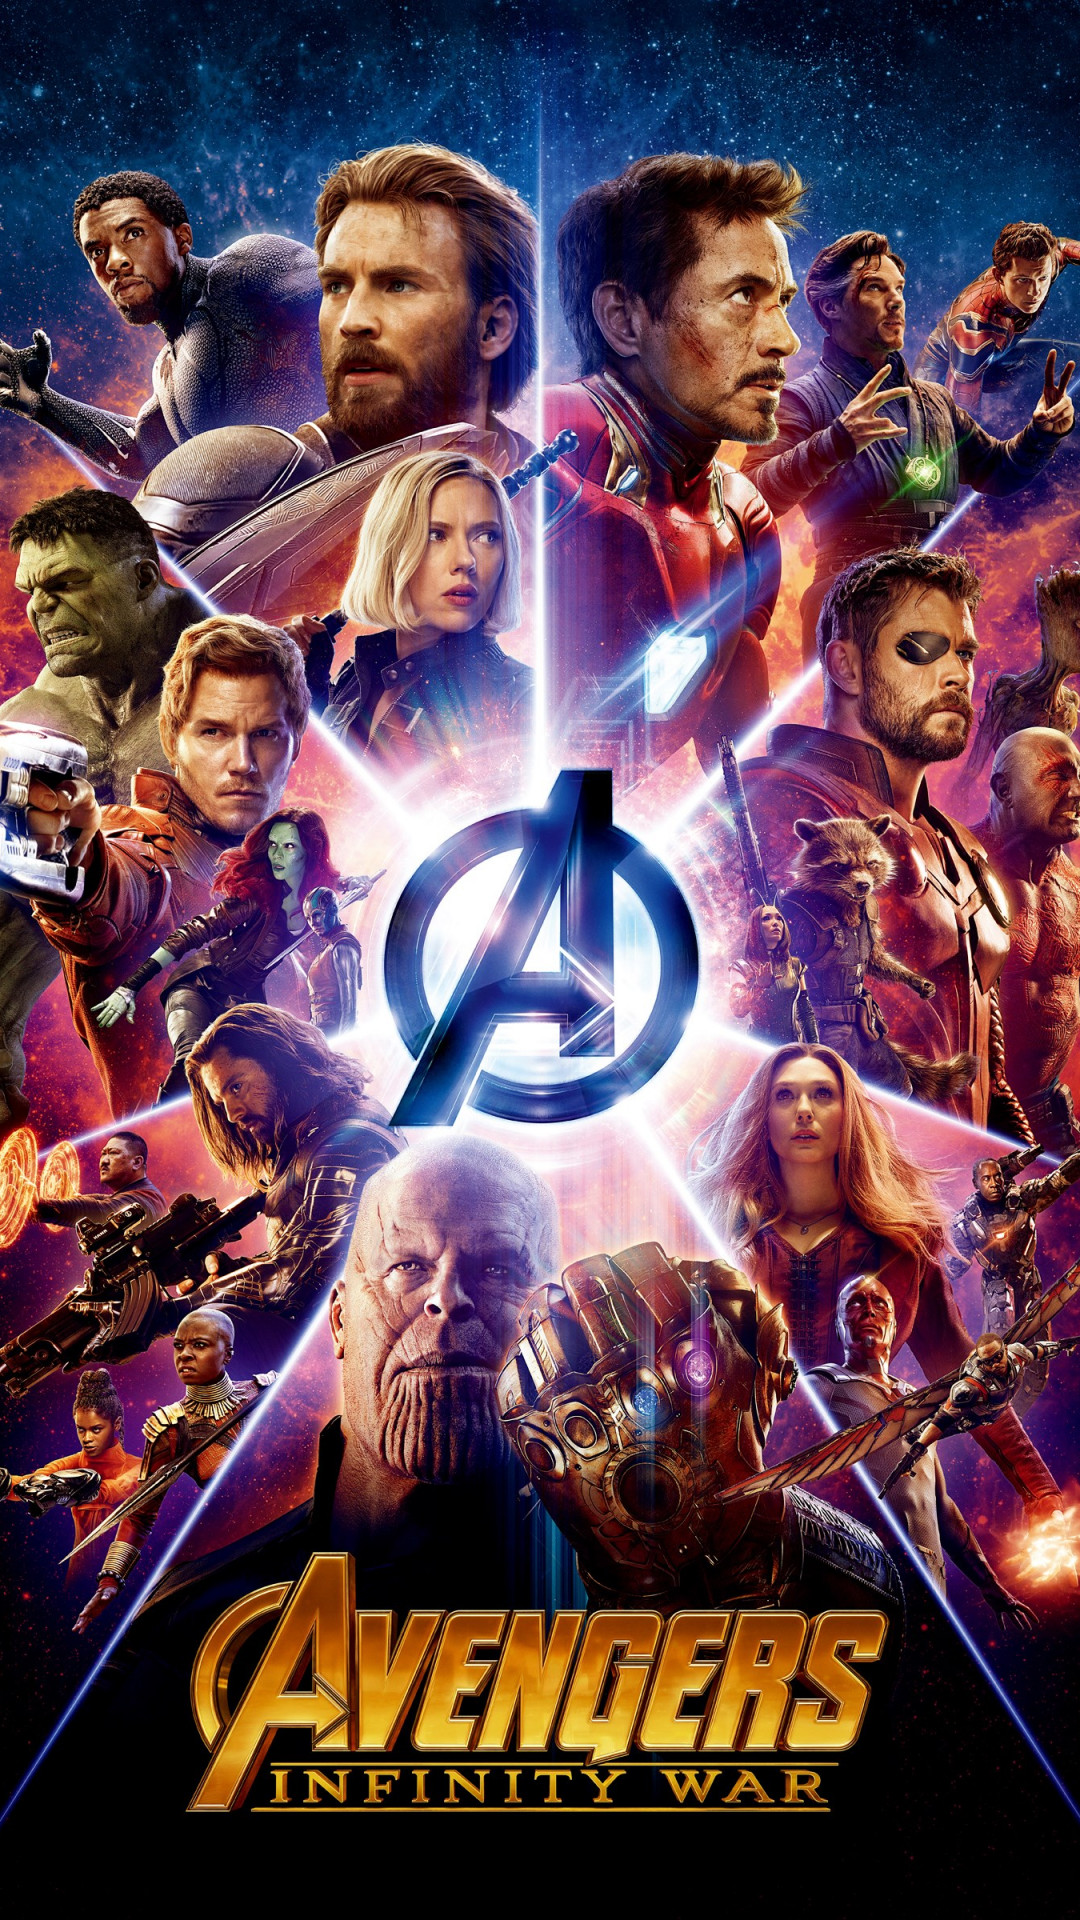 Download wallpaper: All the heroes from Avengers: Infinity War 1080x1920